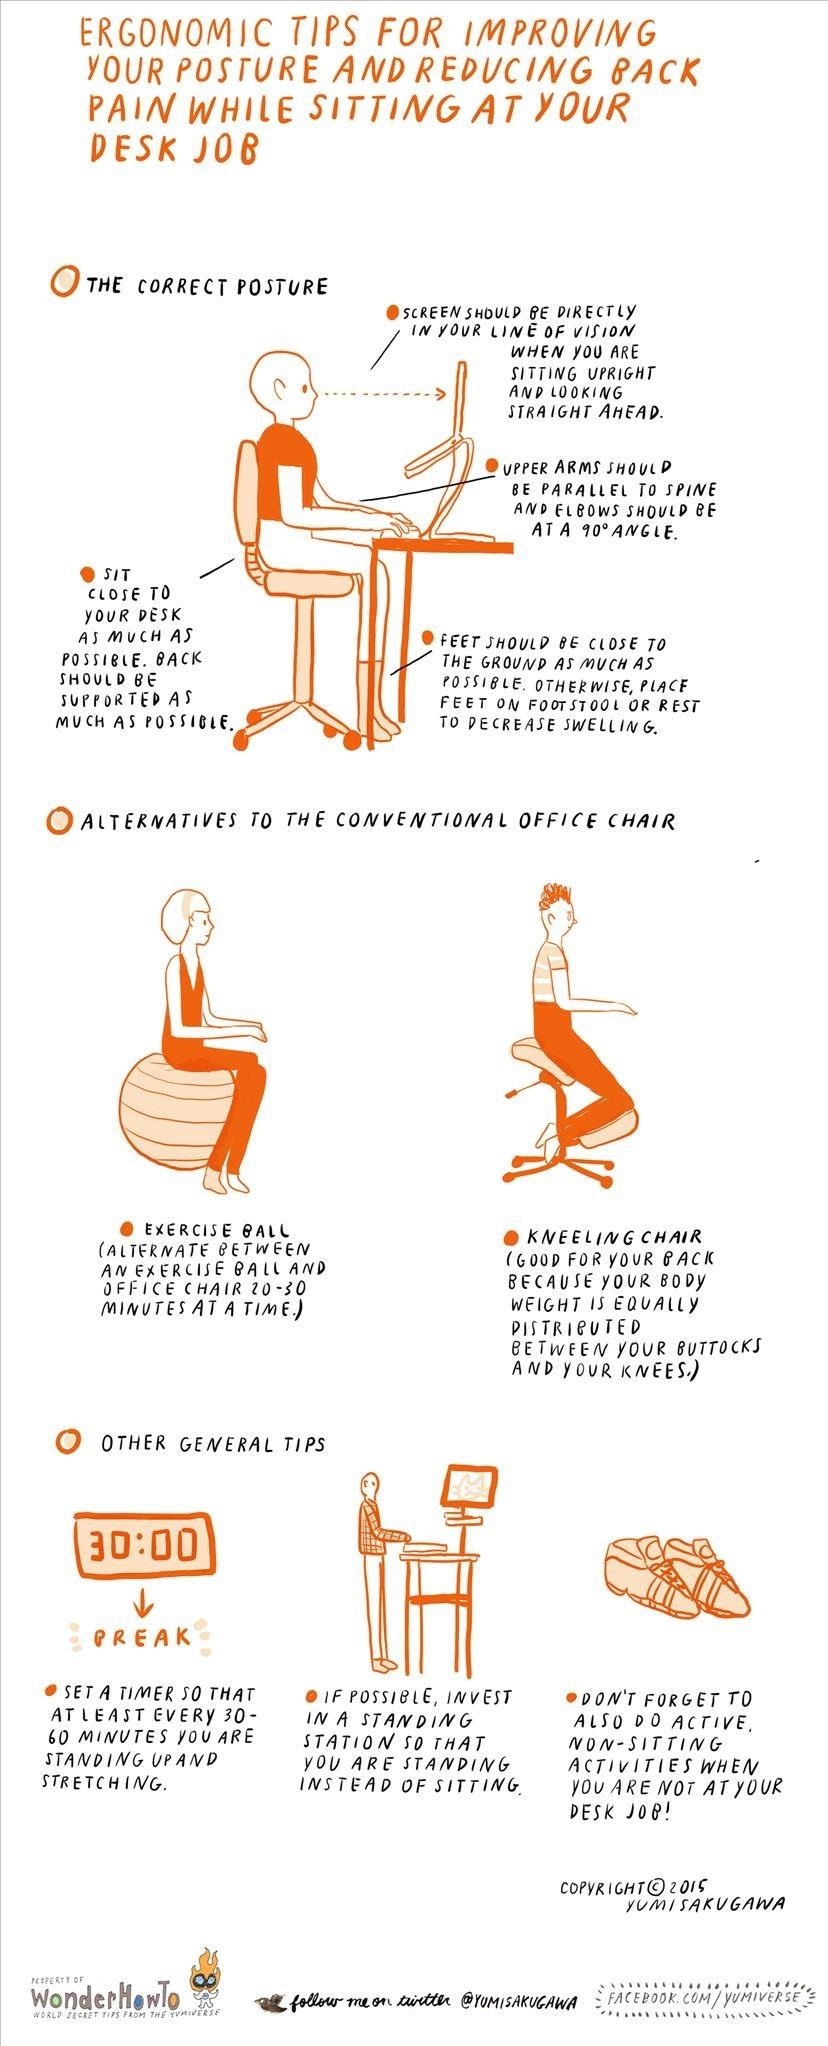 Ergonomic Tips for Improving Posture & Reducing Back Pain While Sitting All Day Long